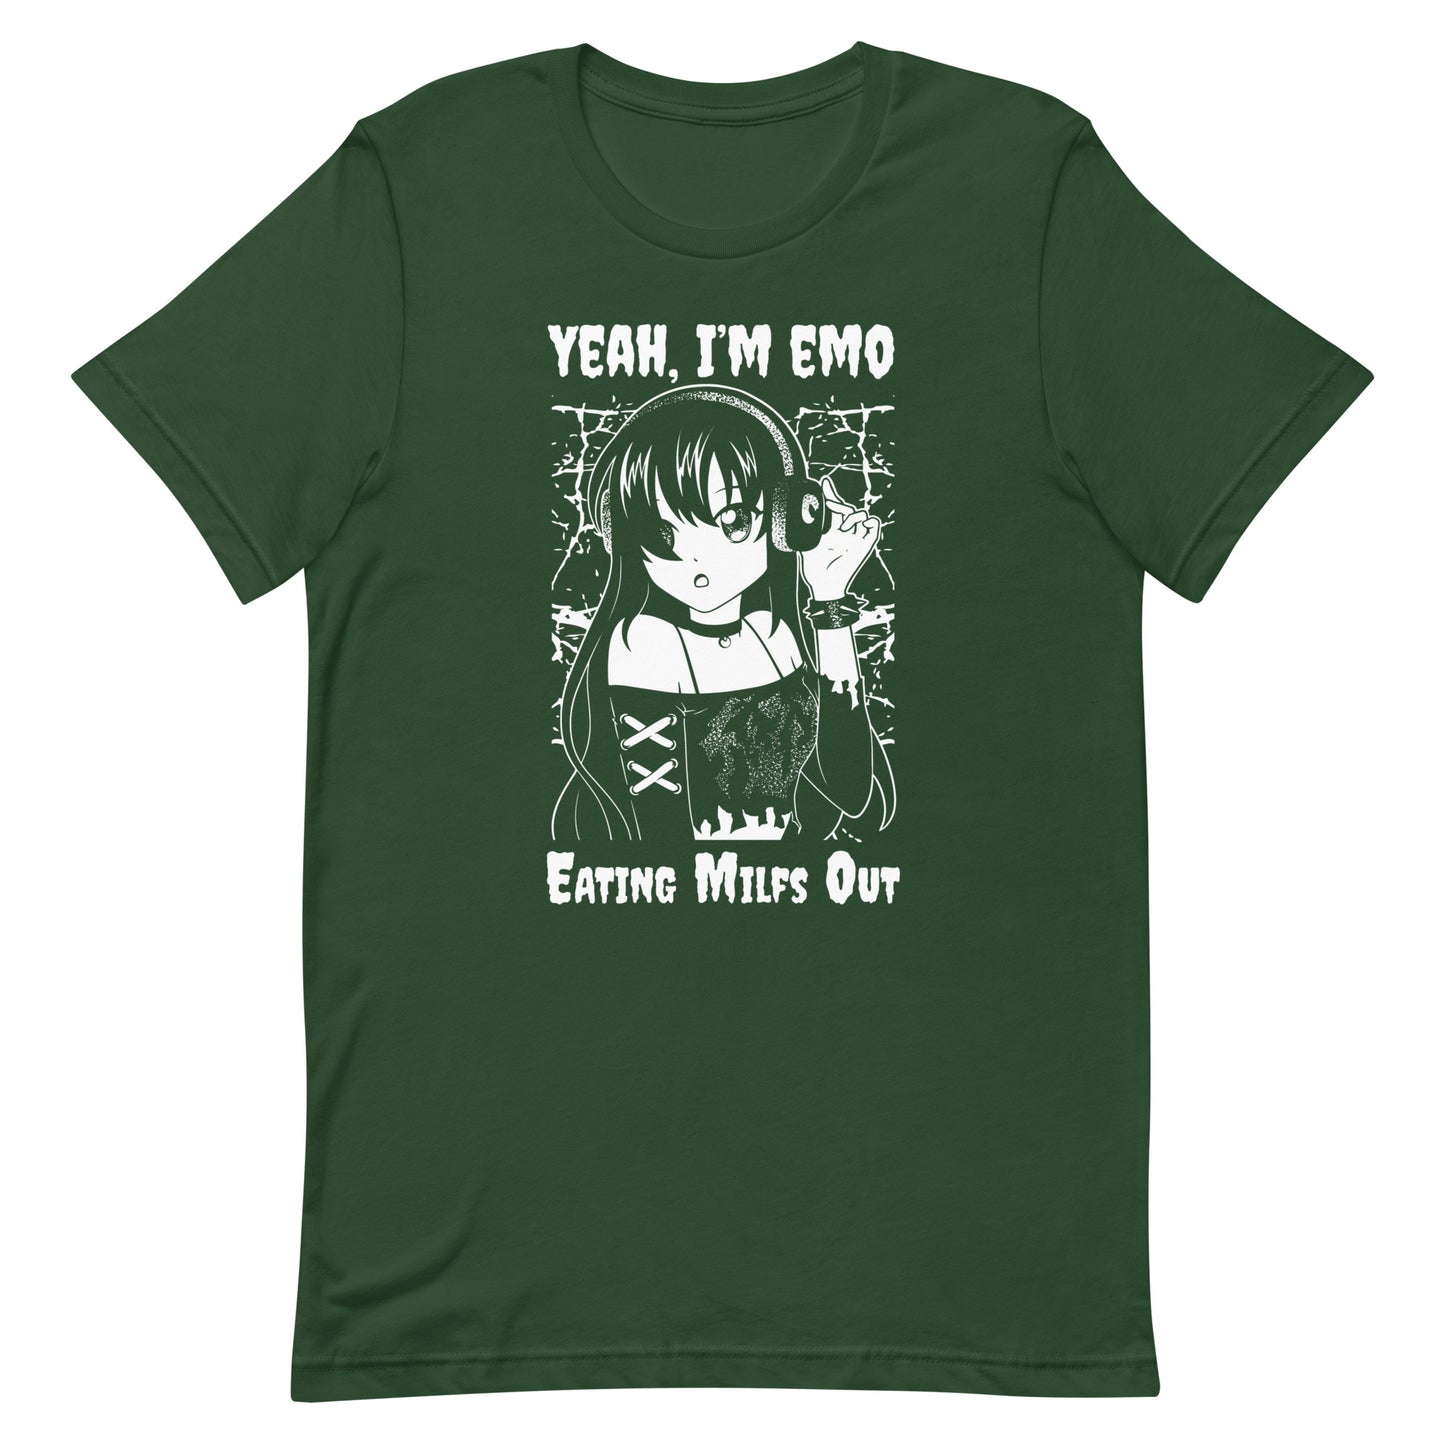 Yeah I'm EMO (Eating Milfs Out) Unisex t-shirt